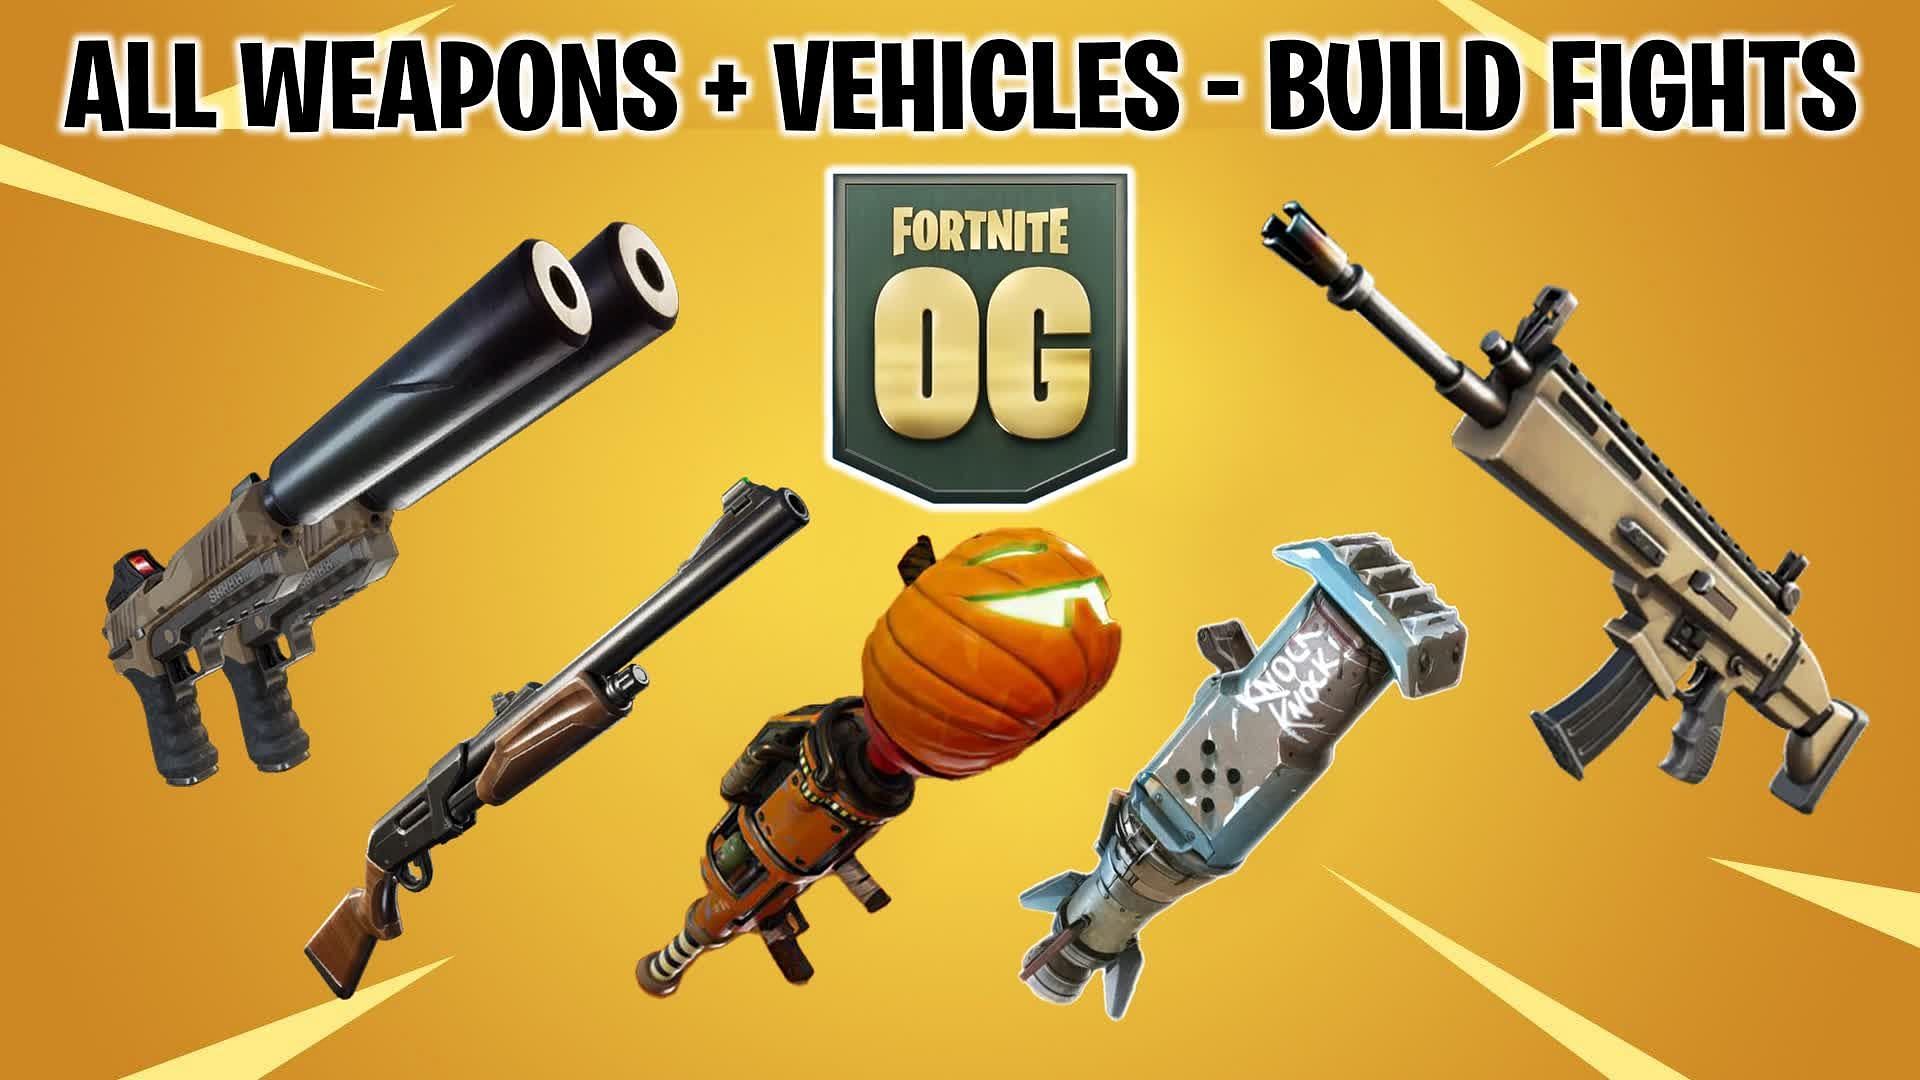 All Weapons + Vehicles - Build Fights map (Image via Epic Games/Fortnite)